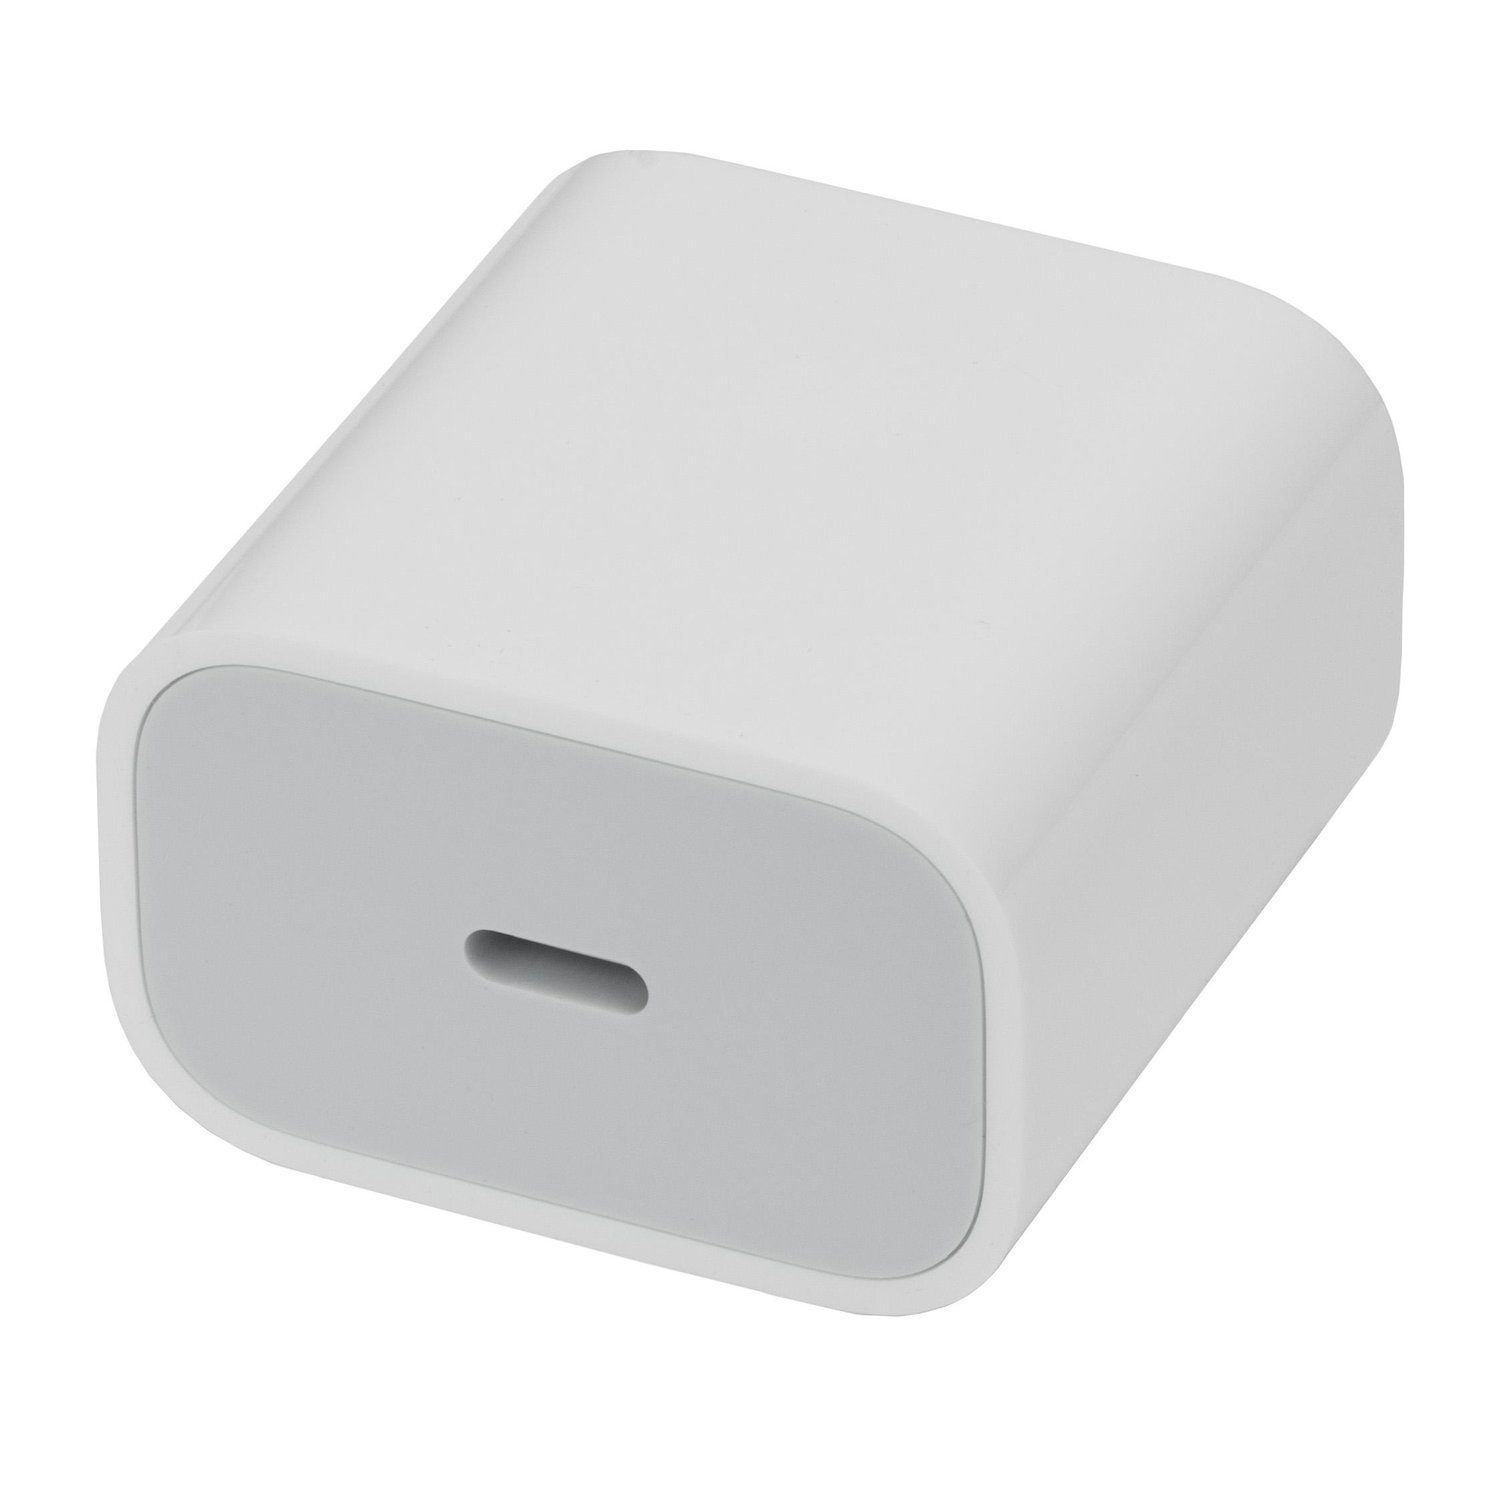 Apple Genuine 20W USB-C Adapter/Charger Power